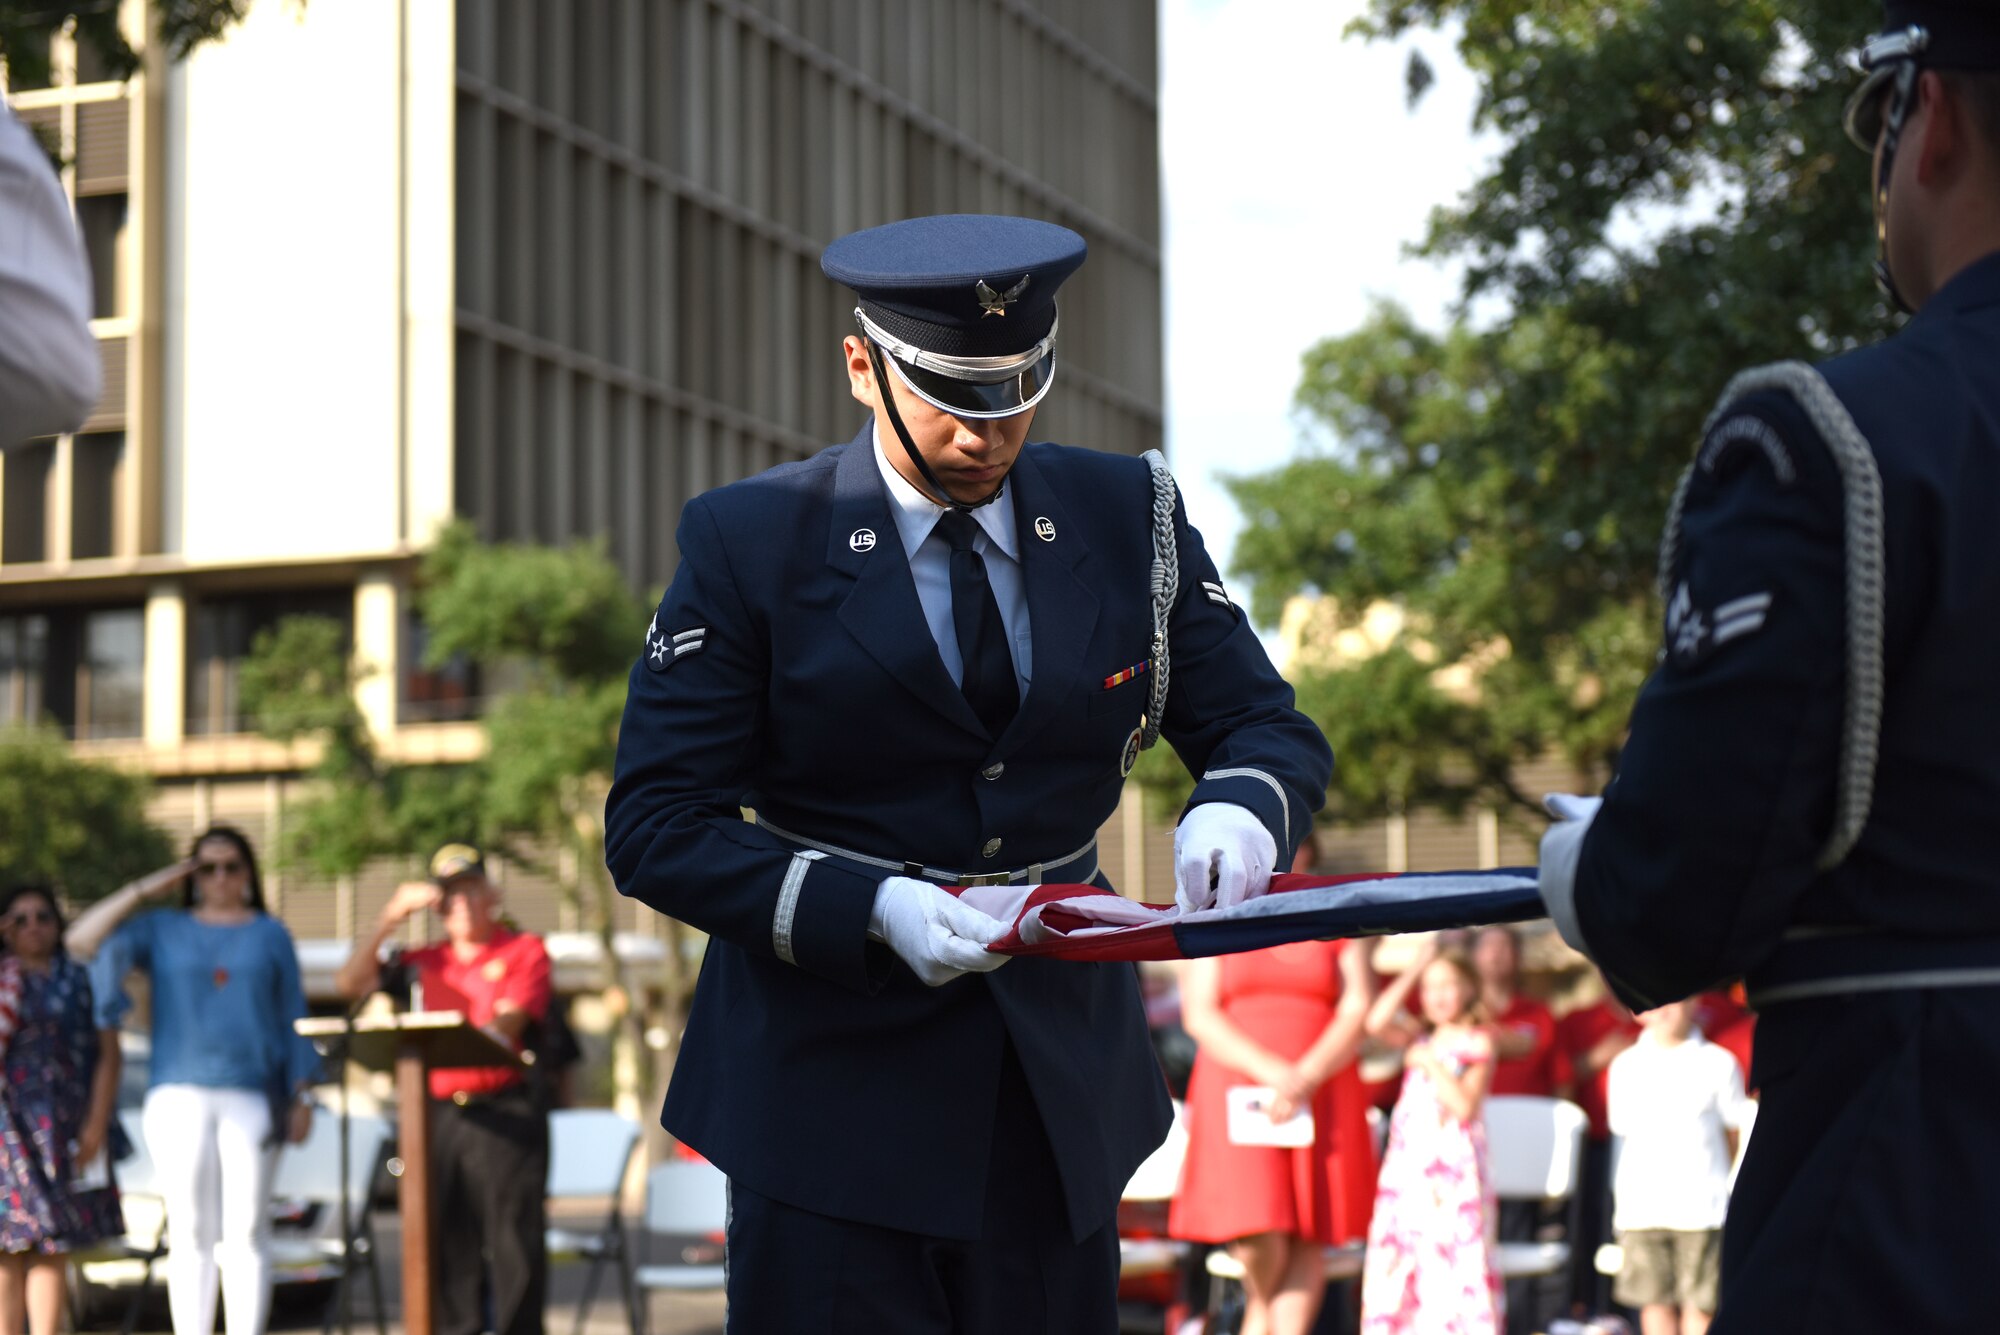 U.S. Air Force Airman 1st Class Issak Guerrero, Goodfellow Air Force Base Honor Guard member, folds the flag for a special presentation ceremony during the Memorial Day Commemoration at the Tom Green County Courthouse in San Angelo, Texas, May 27, 2019. The flag was presented to Kathy Fiscus in honor of her husband’s service. (U.S. Air Force photo by Senior Airman Seraiah Hines/Released)